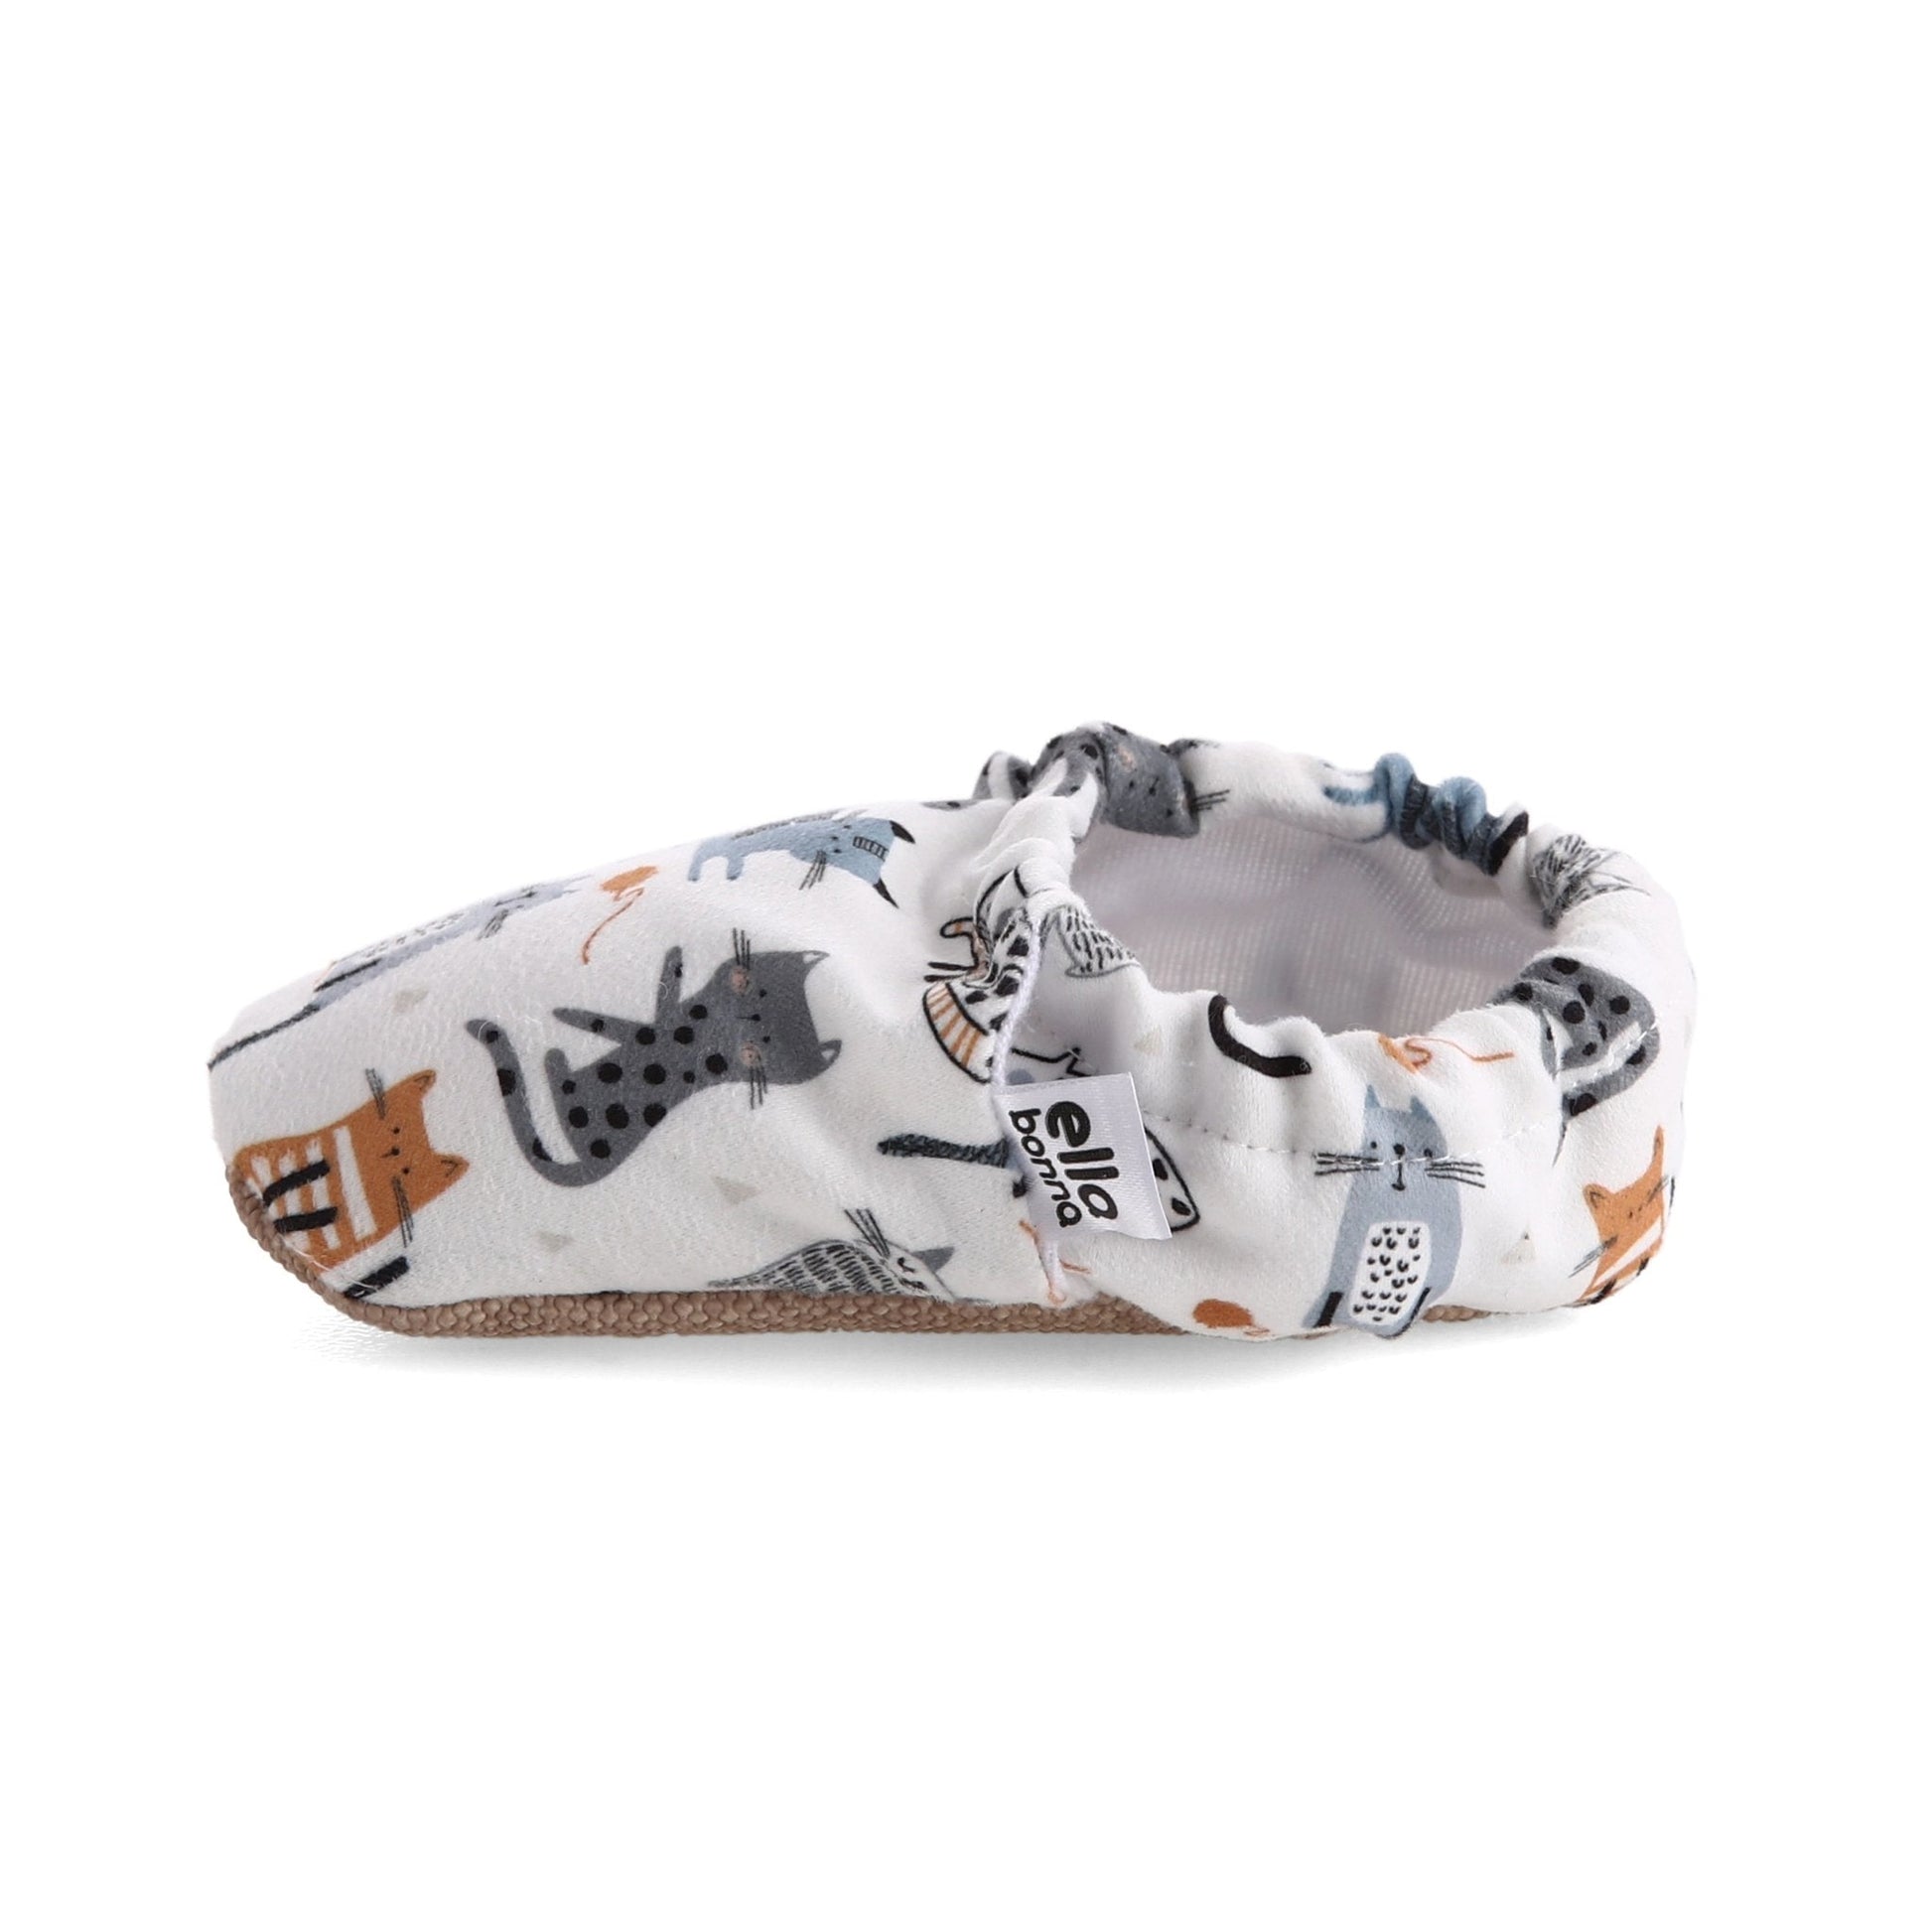 Cats Patterned Baby Booties